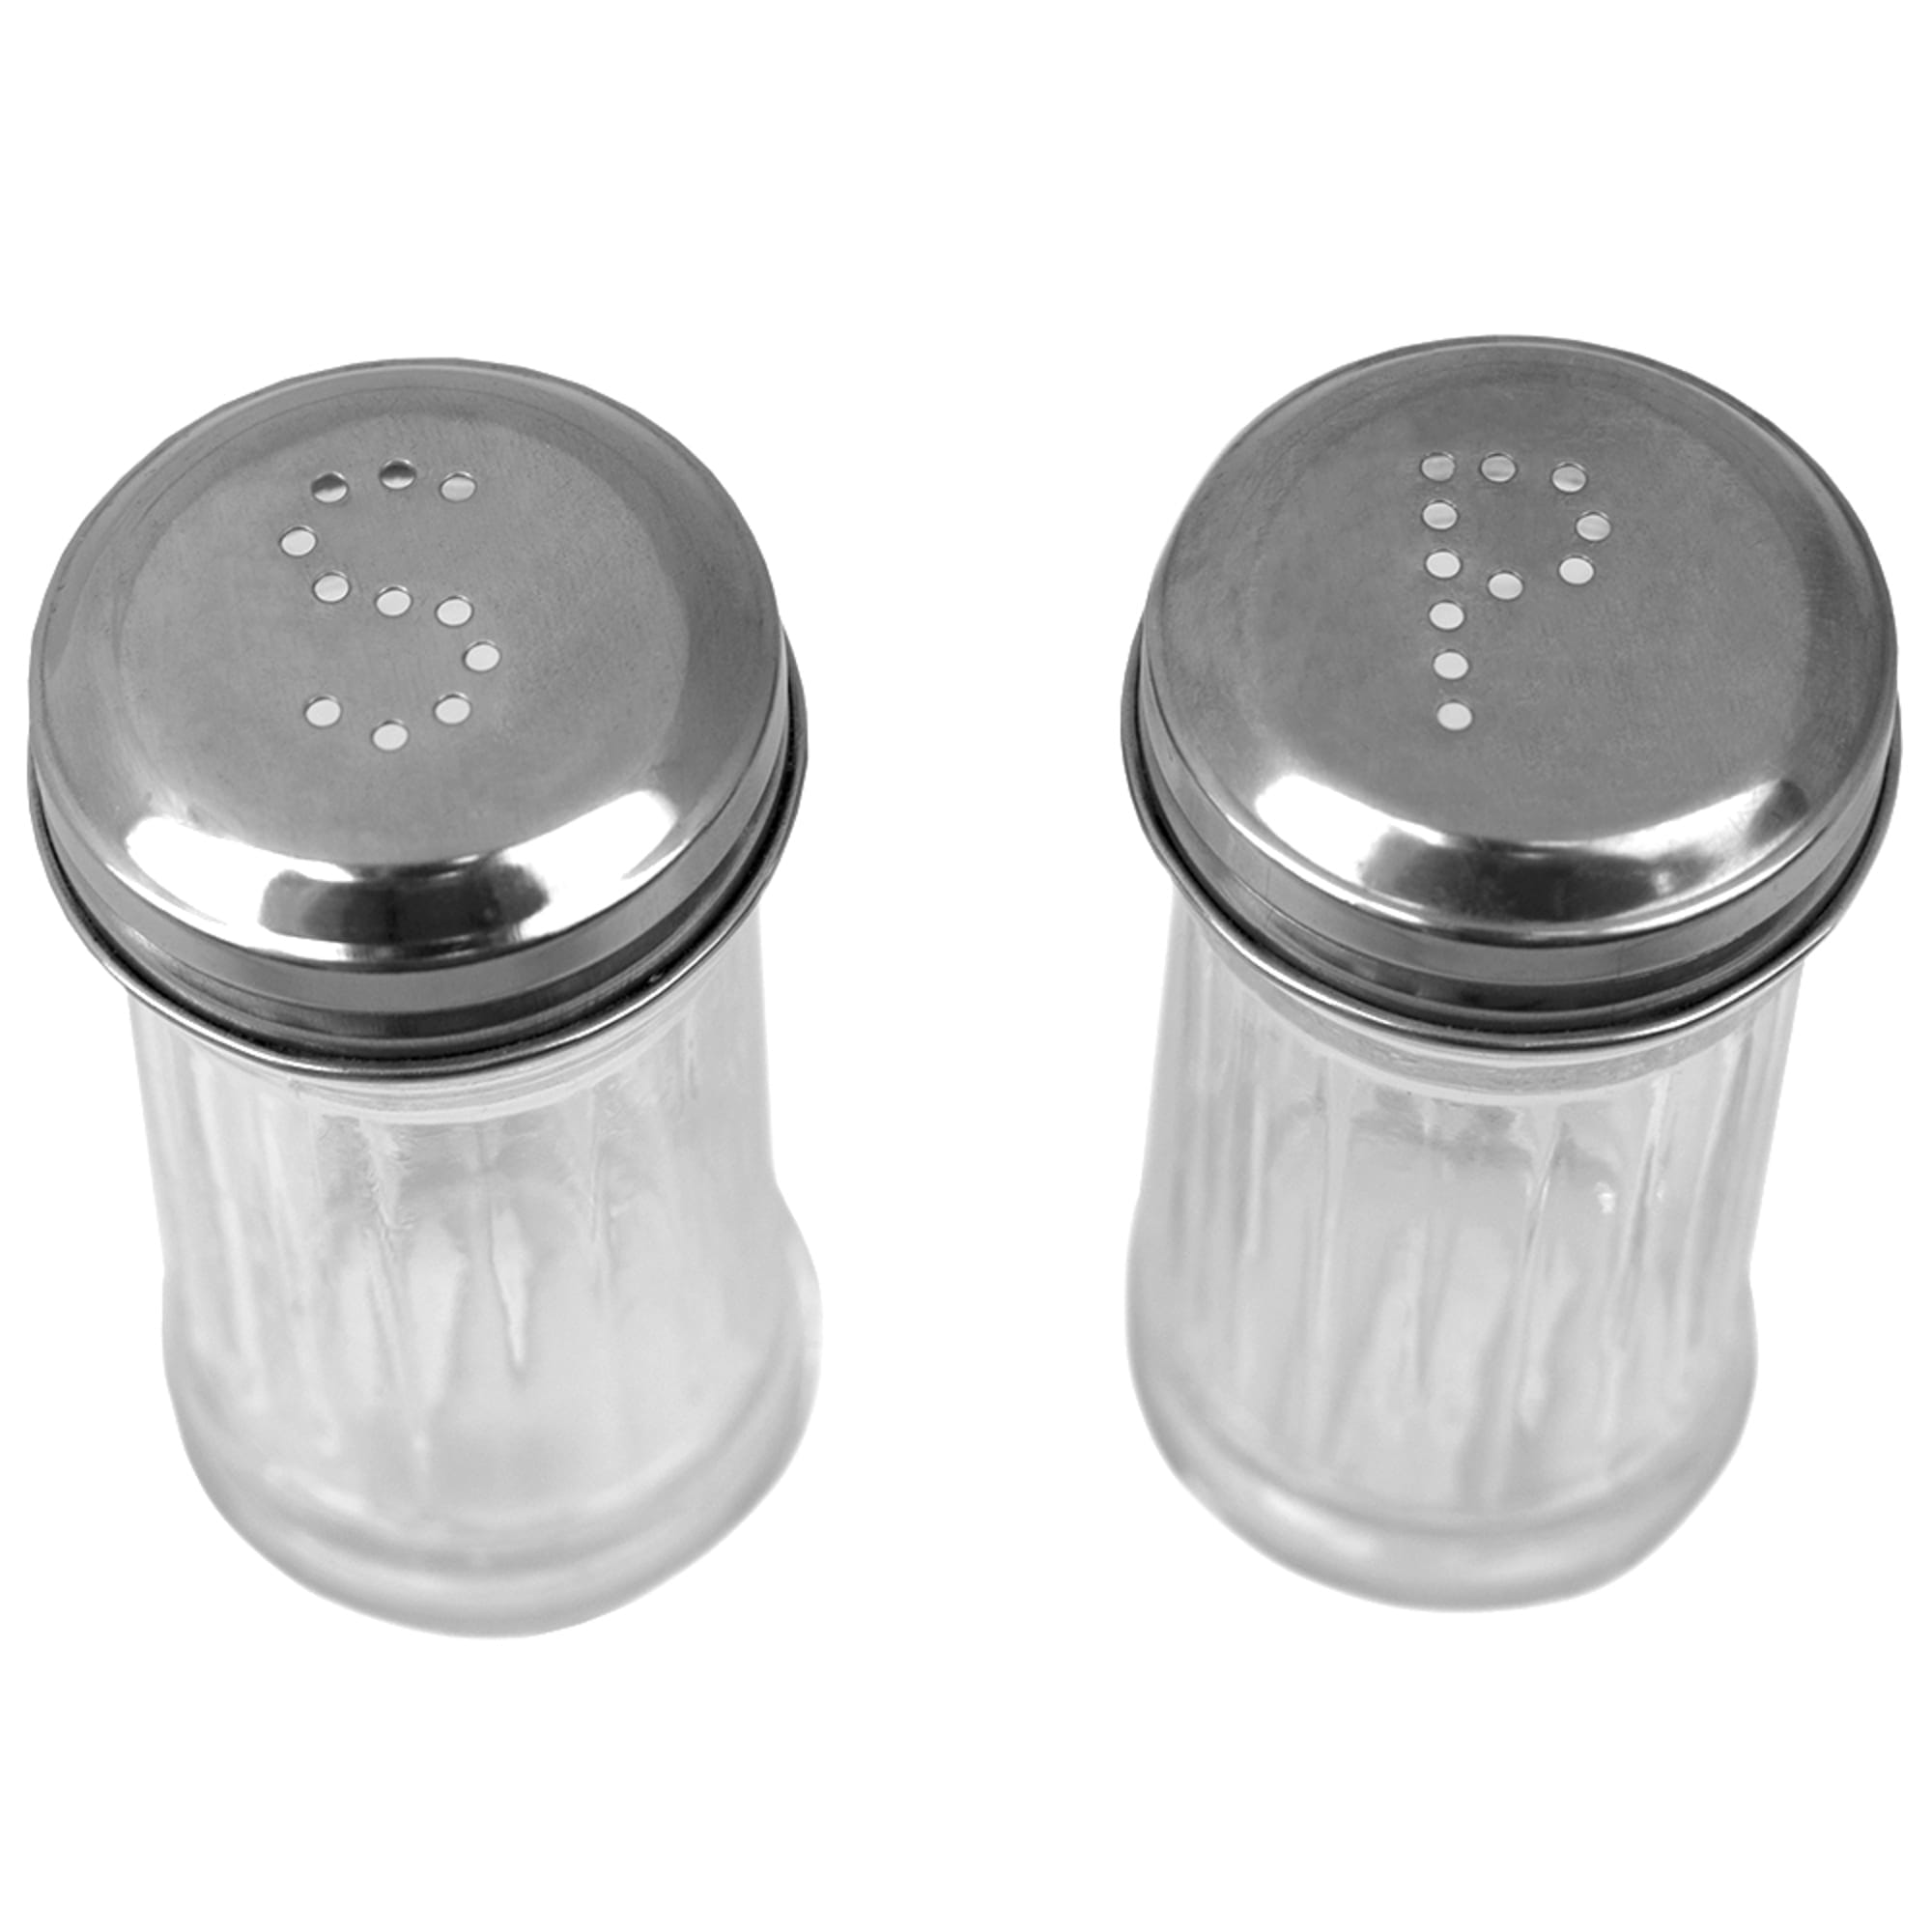 Home Basics Ribbed Glass 4 oz. Tabletop Salt and Pepper Set with Perforated Labeled Sifter Top, (Set of 2), Clear $2.00 EACH, CASE PACK OF 24